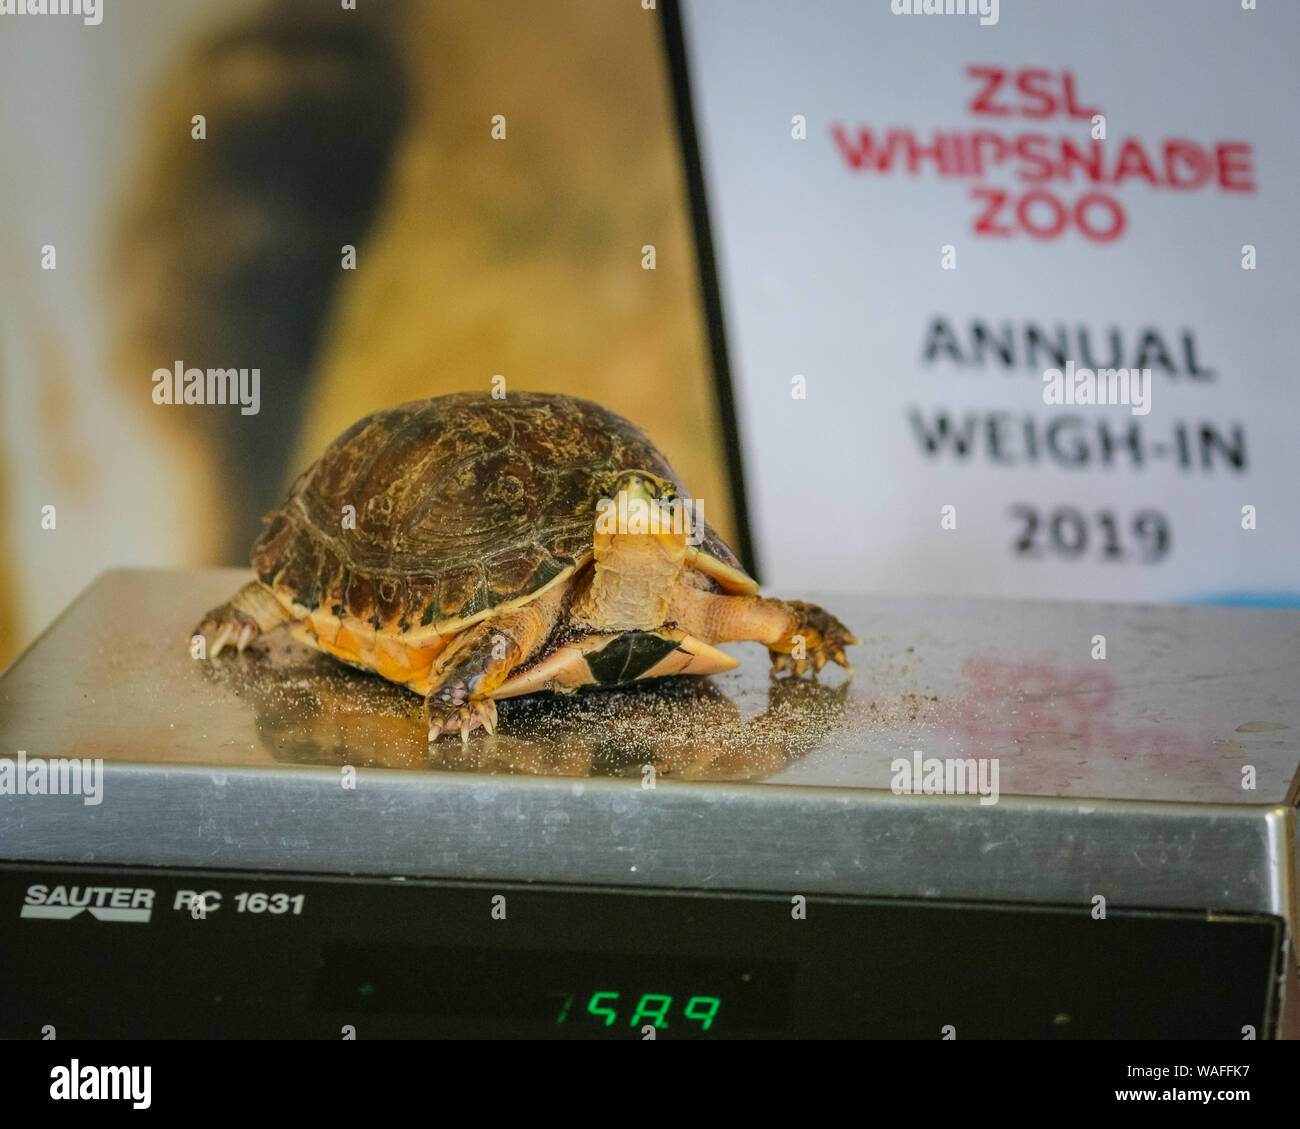 ZSL Whipsnade Zoo, Bedfordshire, UK, 20th Aug 2019. Keeper Tyrone takes the weight and measurements of a McCord's box turtle (Cuora mccordi ). Every year, keepers at ZSL Whipsnade Zoo coax thousands of animals to step onto the scales for the annual weigh-in and to record their vital statistics as a way of monitoring health and wellbeing of the 3,500 animals at the UK’s largest Zoo. Credit: Imageplotter/Alamy Live News Stock Photo